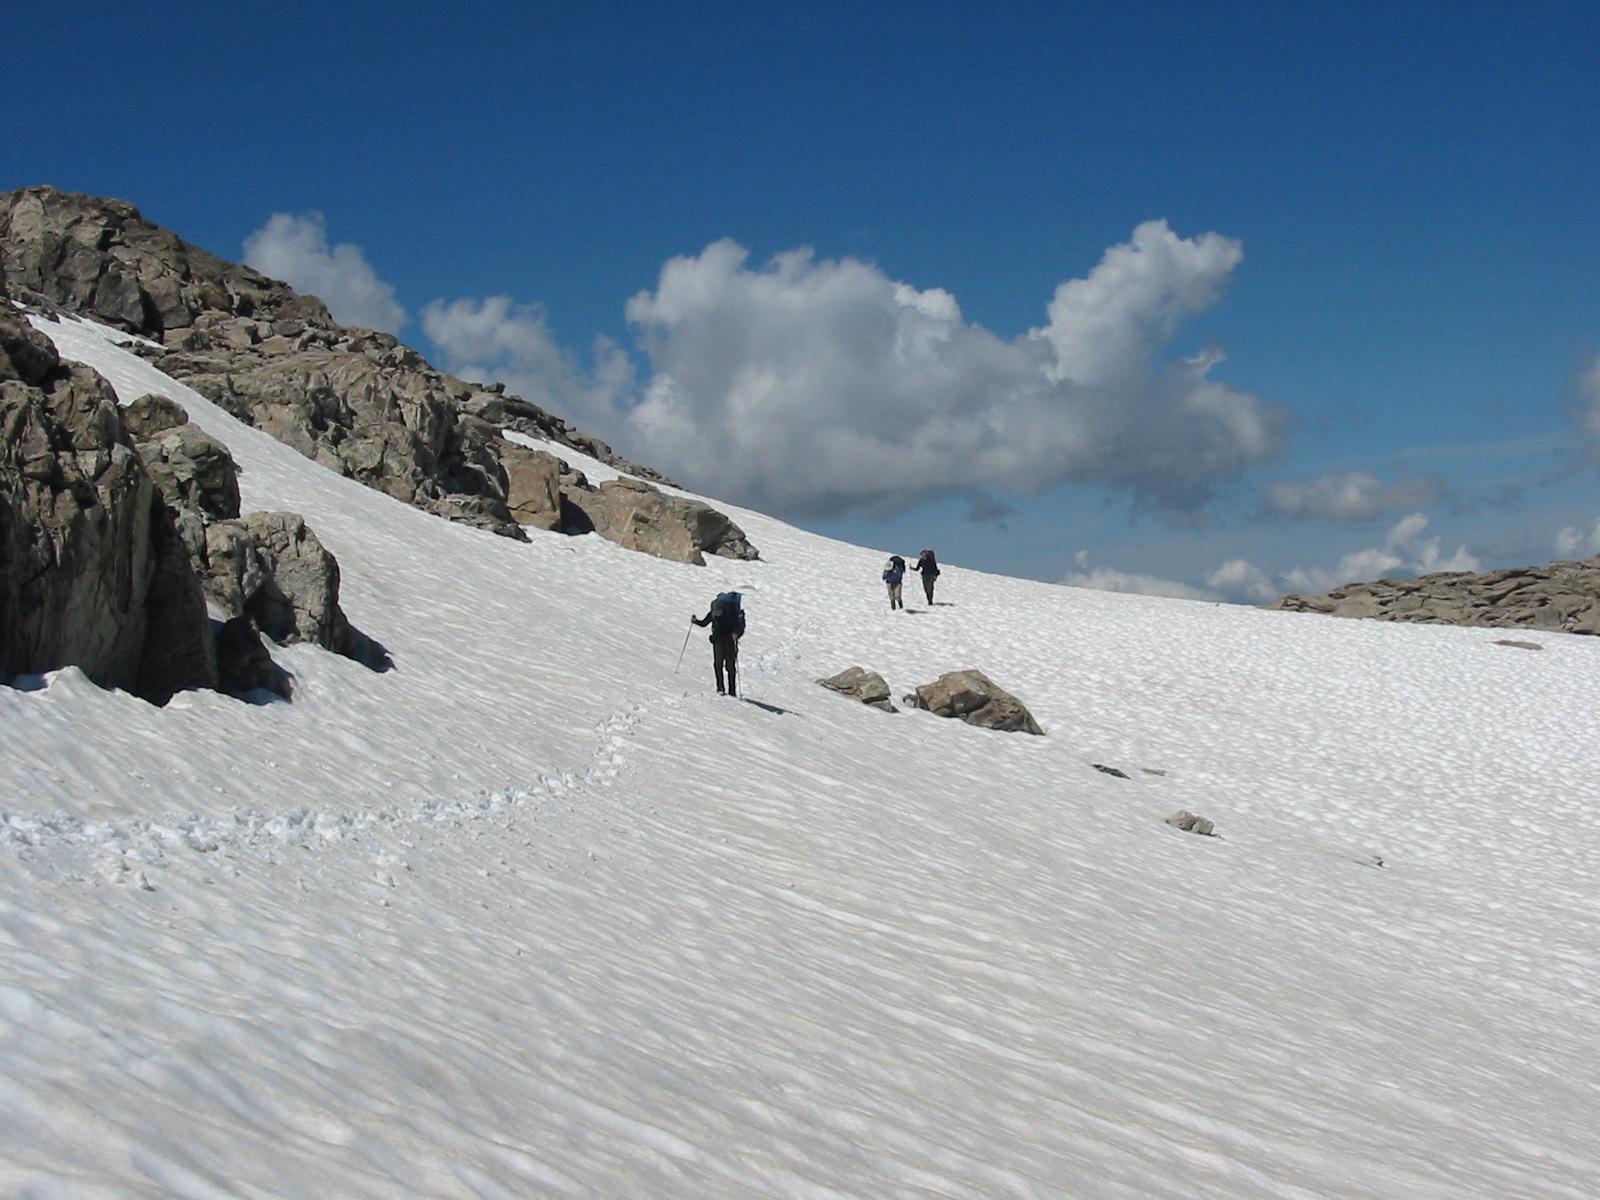 crossing the first snow field